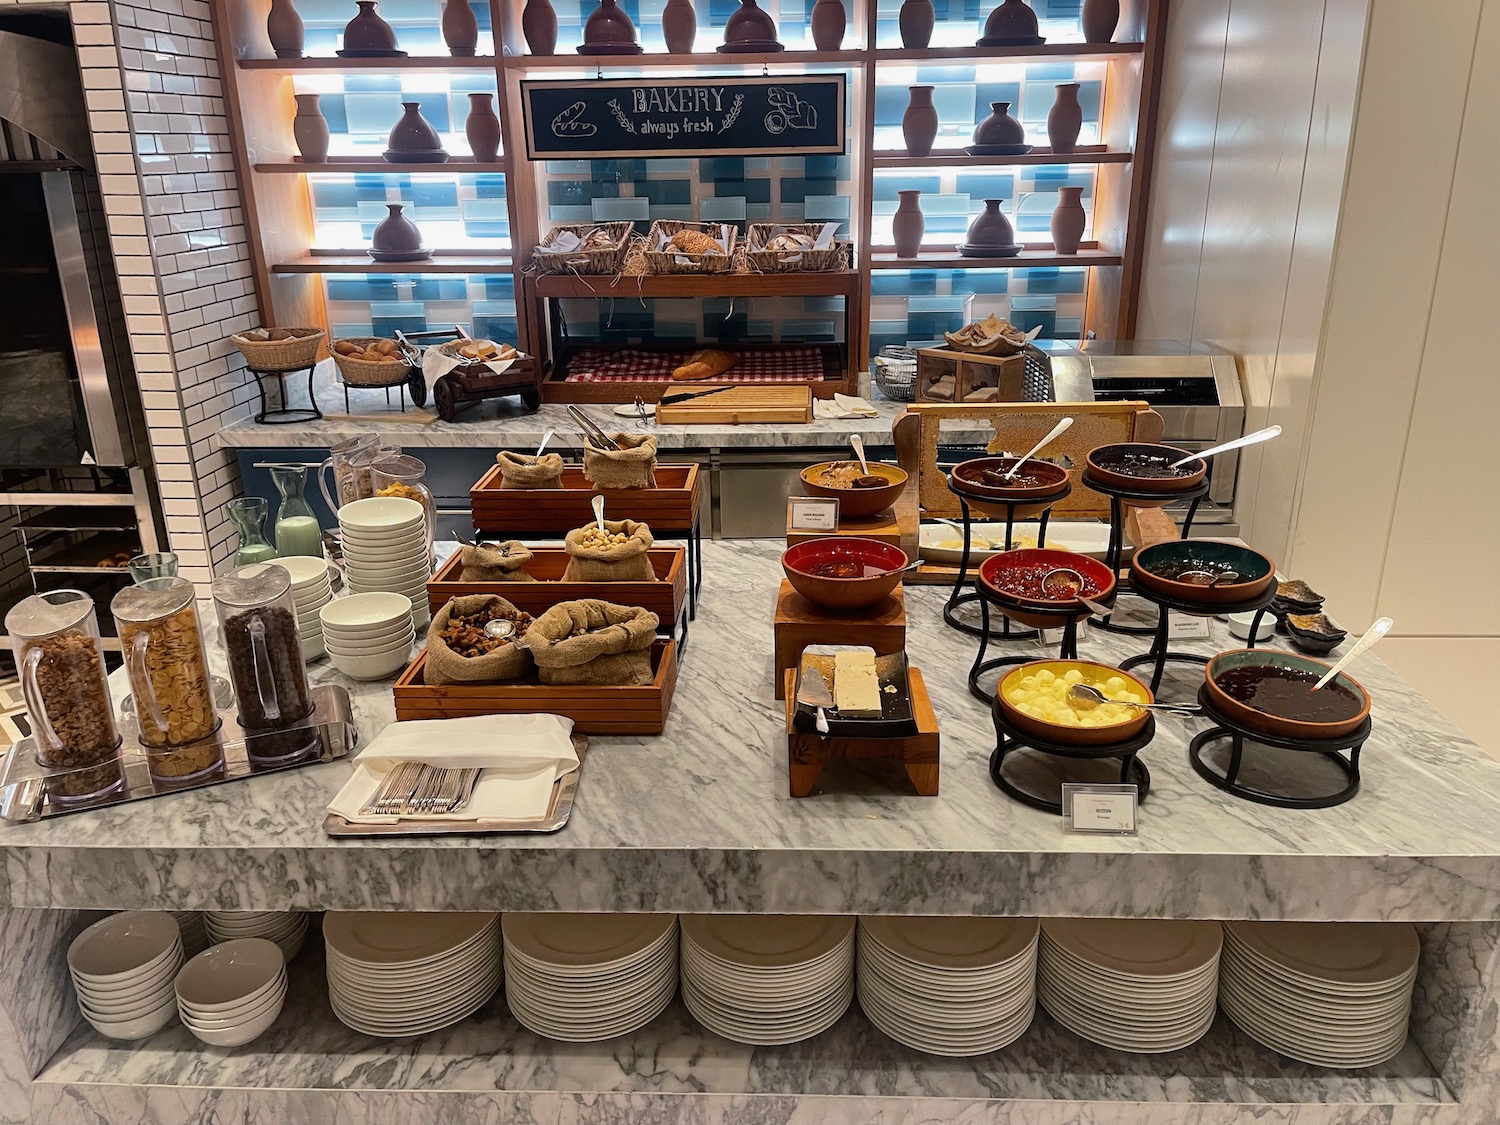 a buffet table with different food items